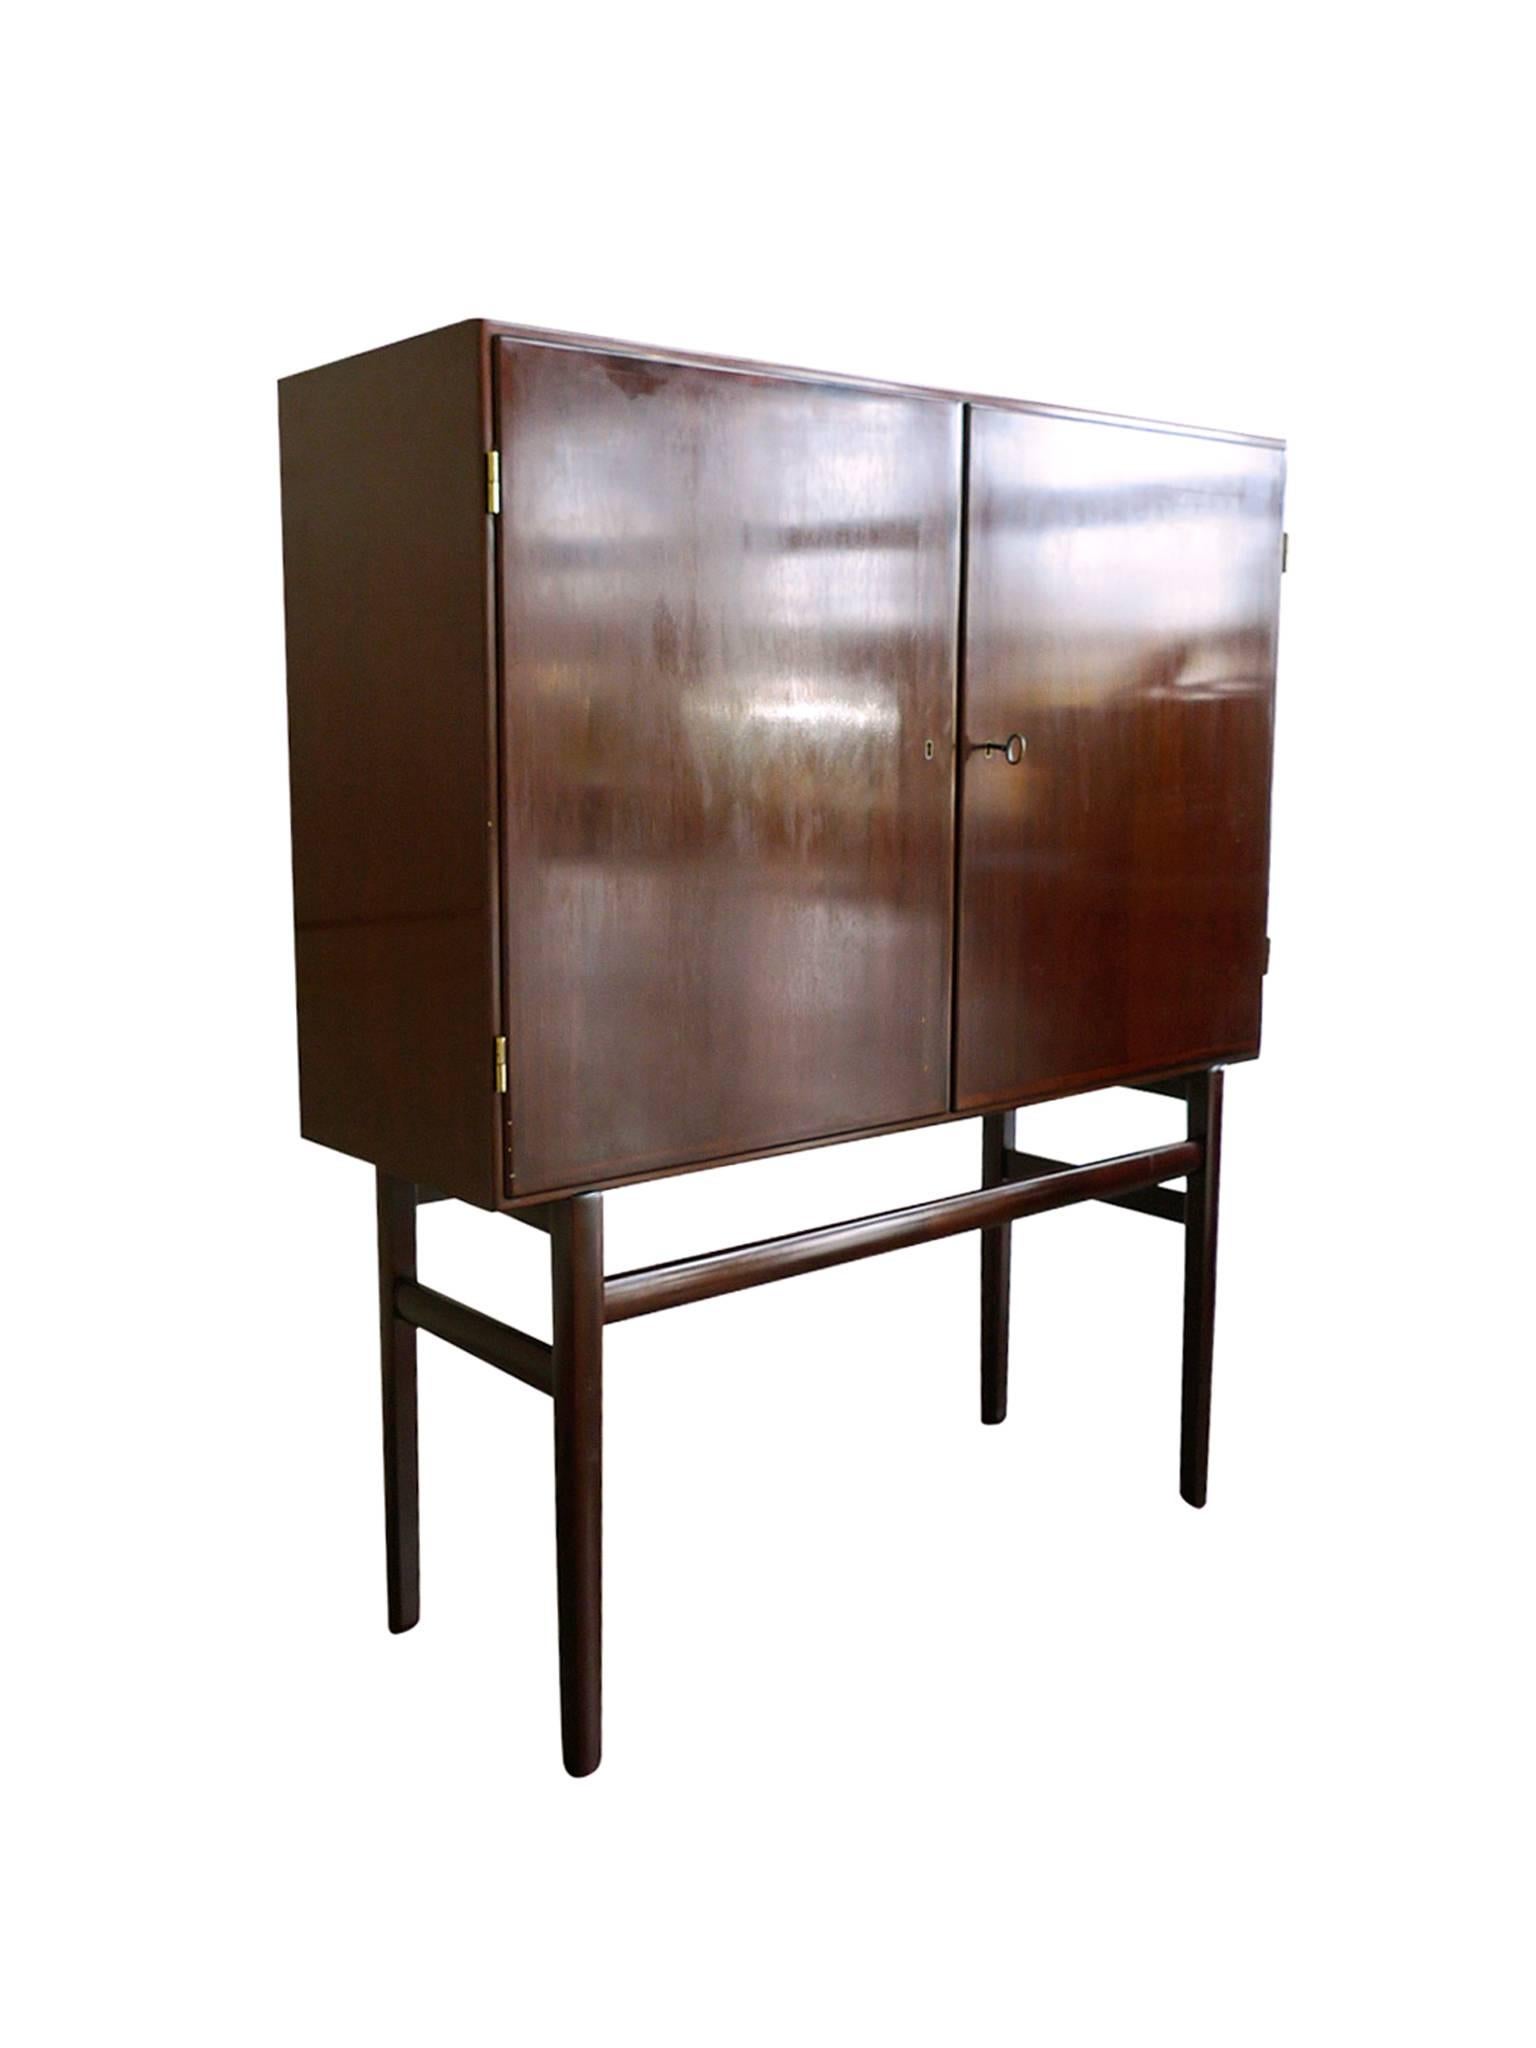 This Danish mahogany highboard or high sideboard, was designed in the 1960s by Ole Wanscher for the manufacturer Poul Jeppesen. Like many of Wanscher's designs, this sideboard combines warm-toned wood, soft, rounded edges, and Minimalist lines.